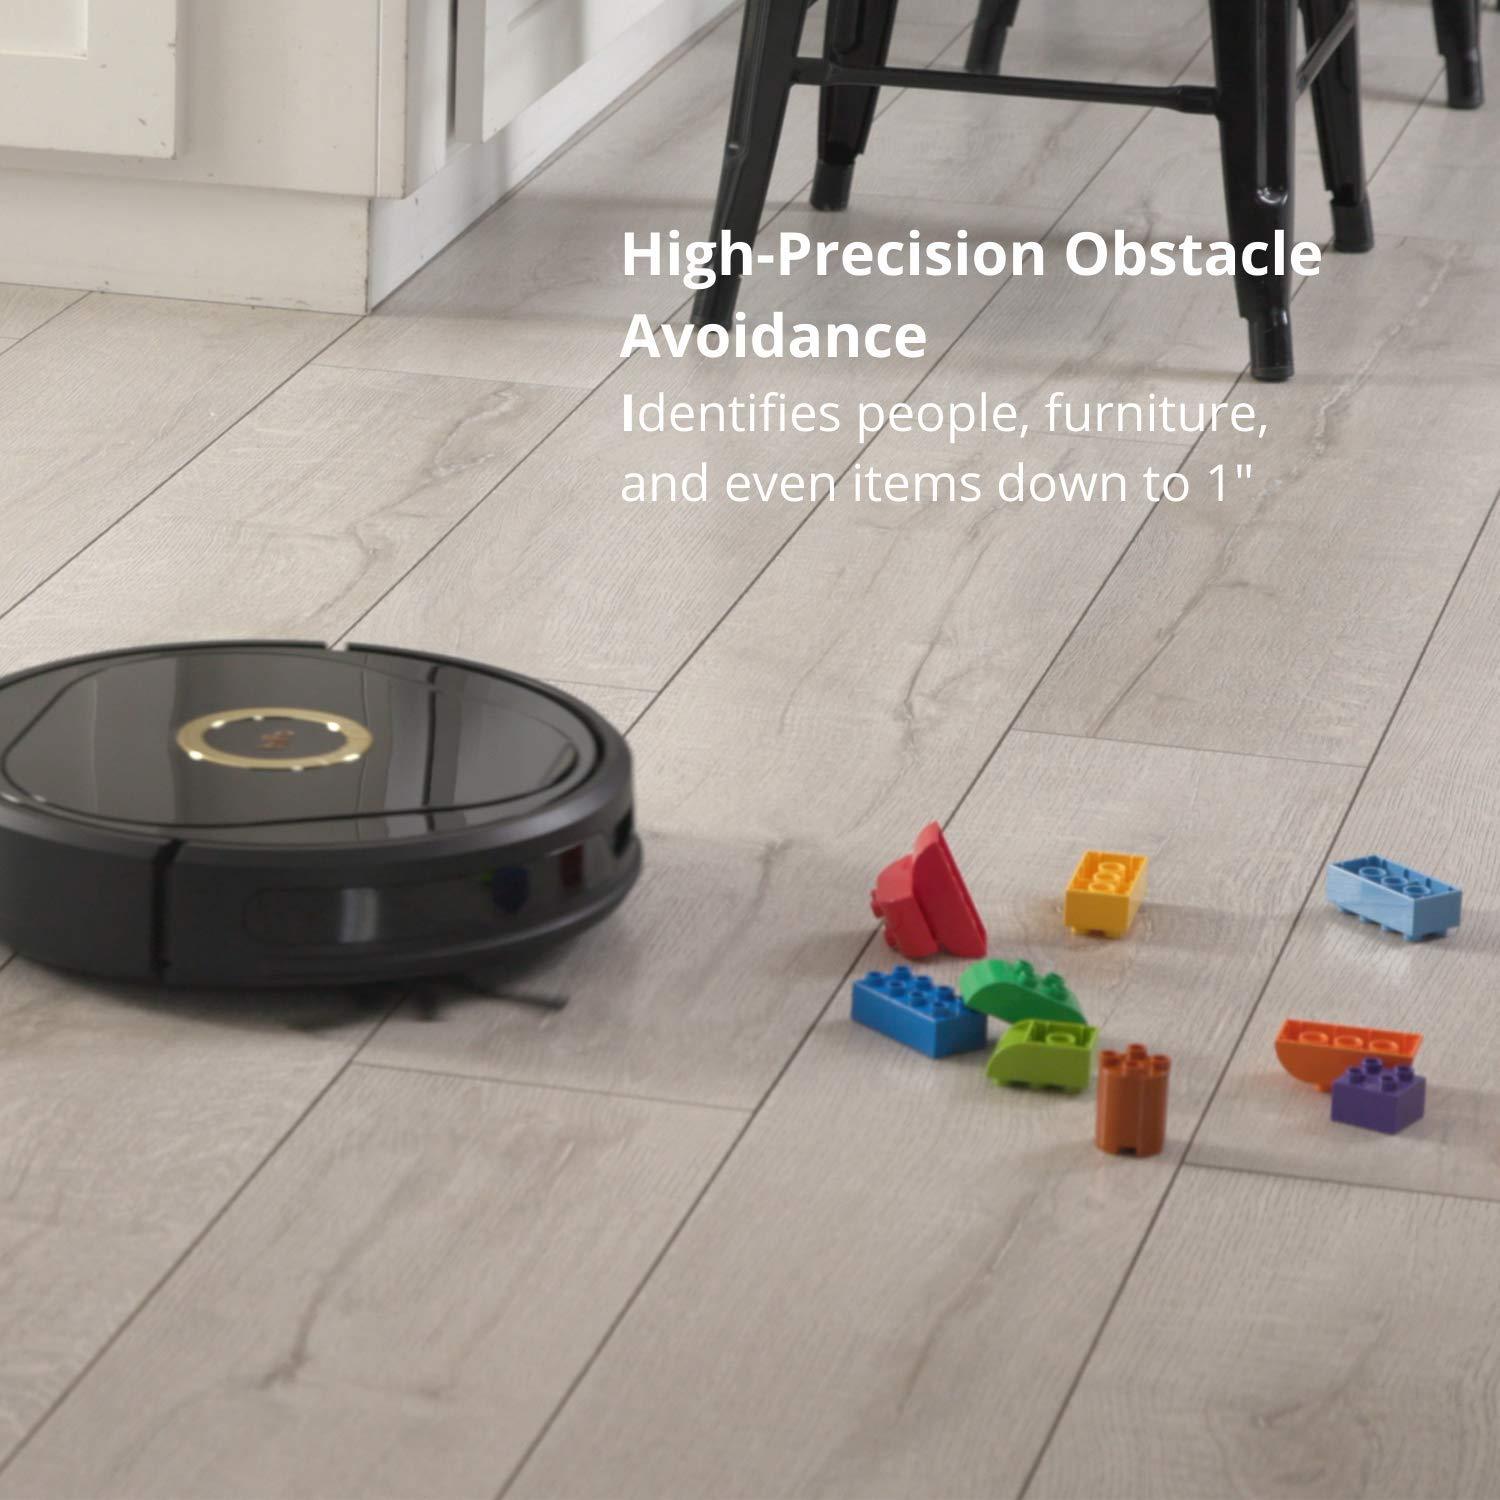 Trifo Lucy AI Home Robot Vacuum with 1080p Full HD Day & Night Vision, Video Recording, Smart Navigation and Mapping, Super Powerful, 3000Pa Suction, Obstacle Avoidance Down to 1", No-go Zones, Pet Hair - image 4 of 7